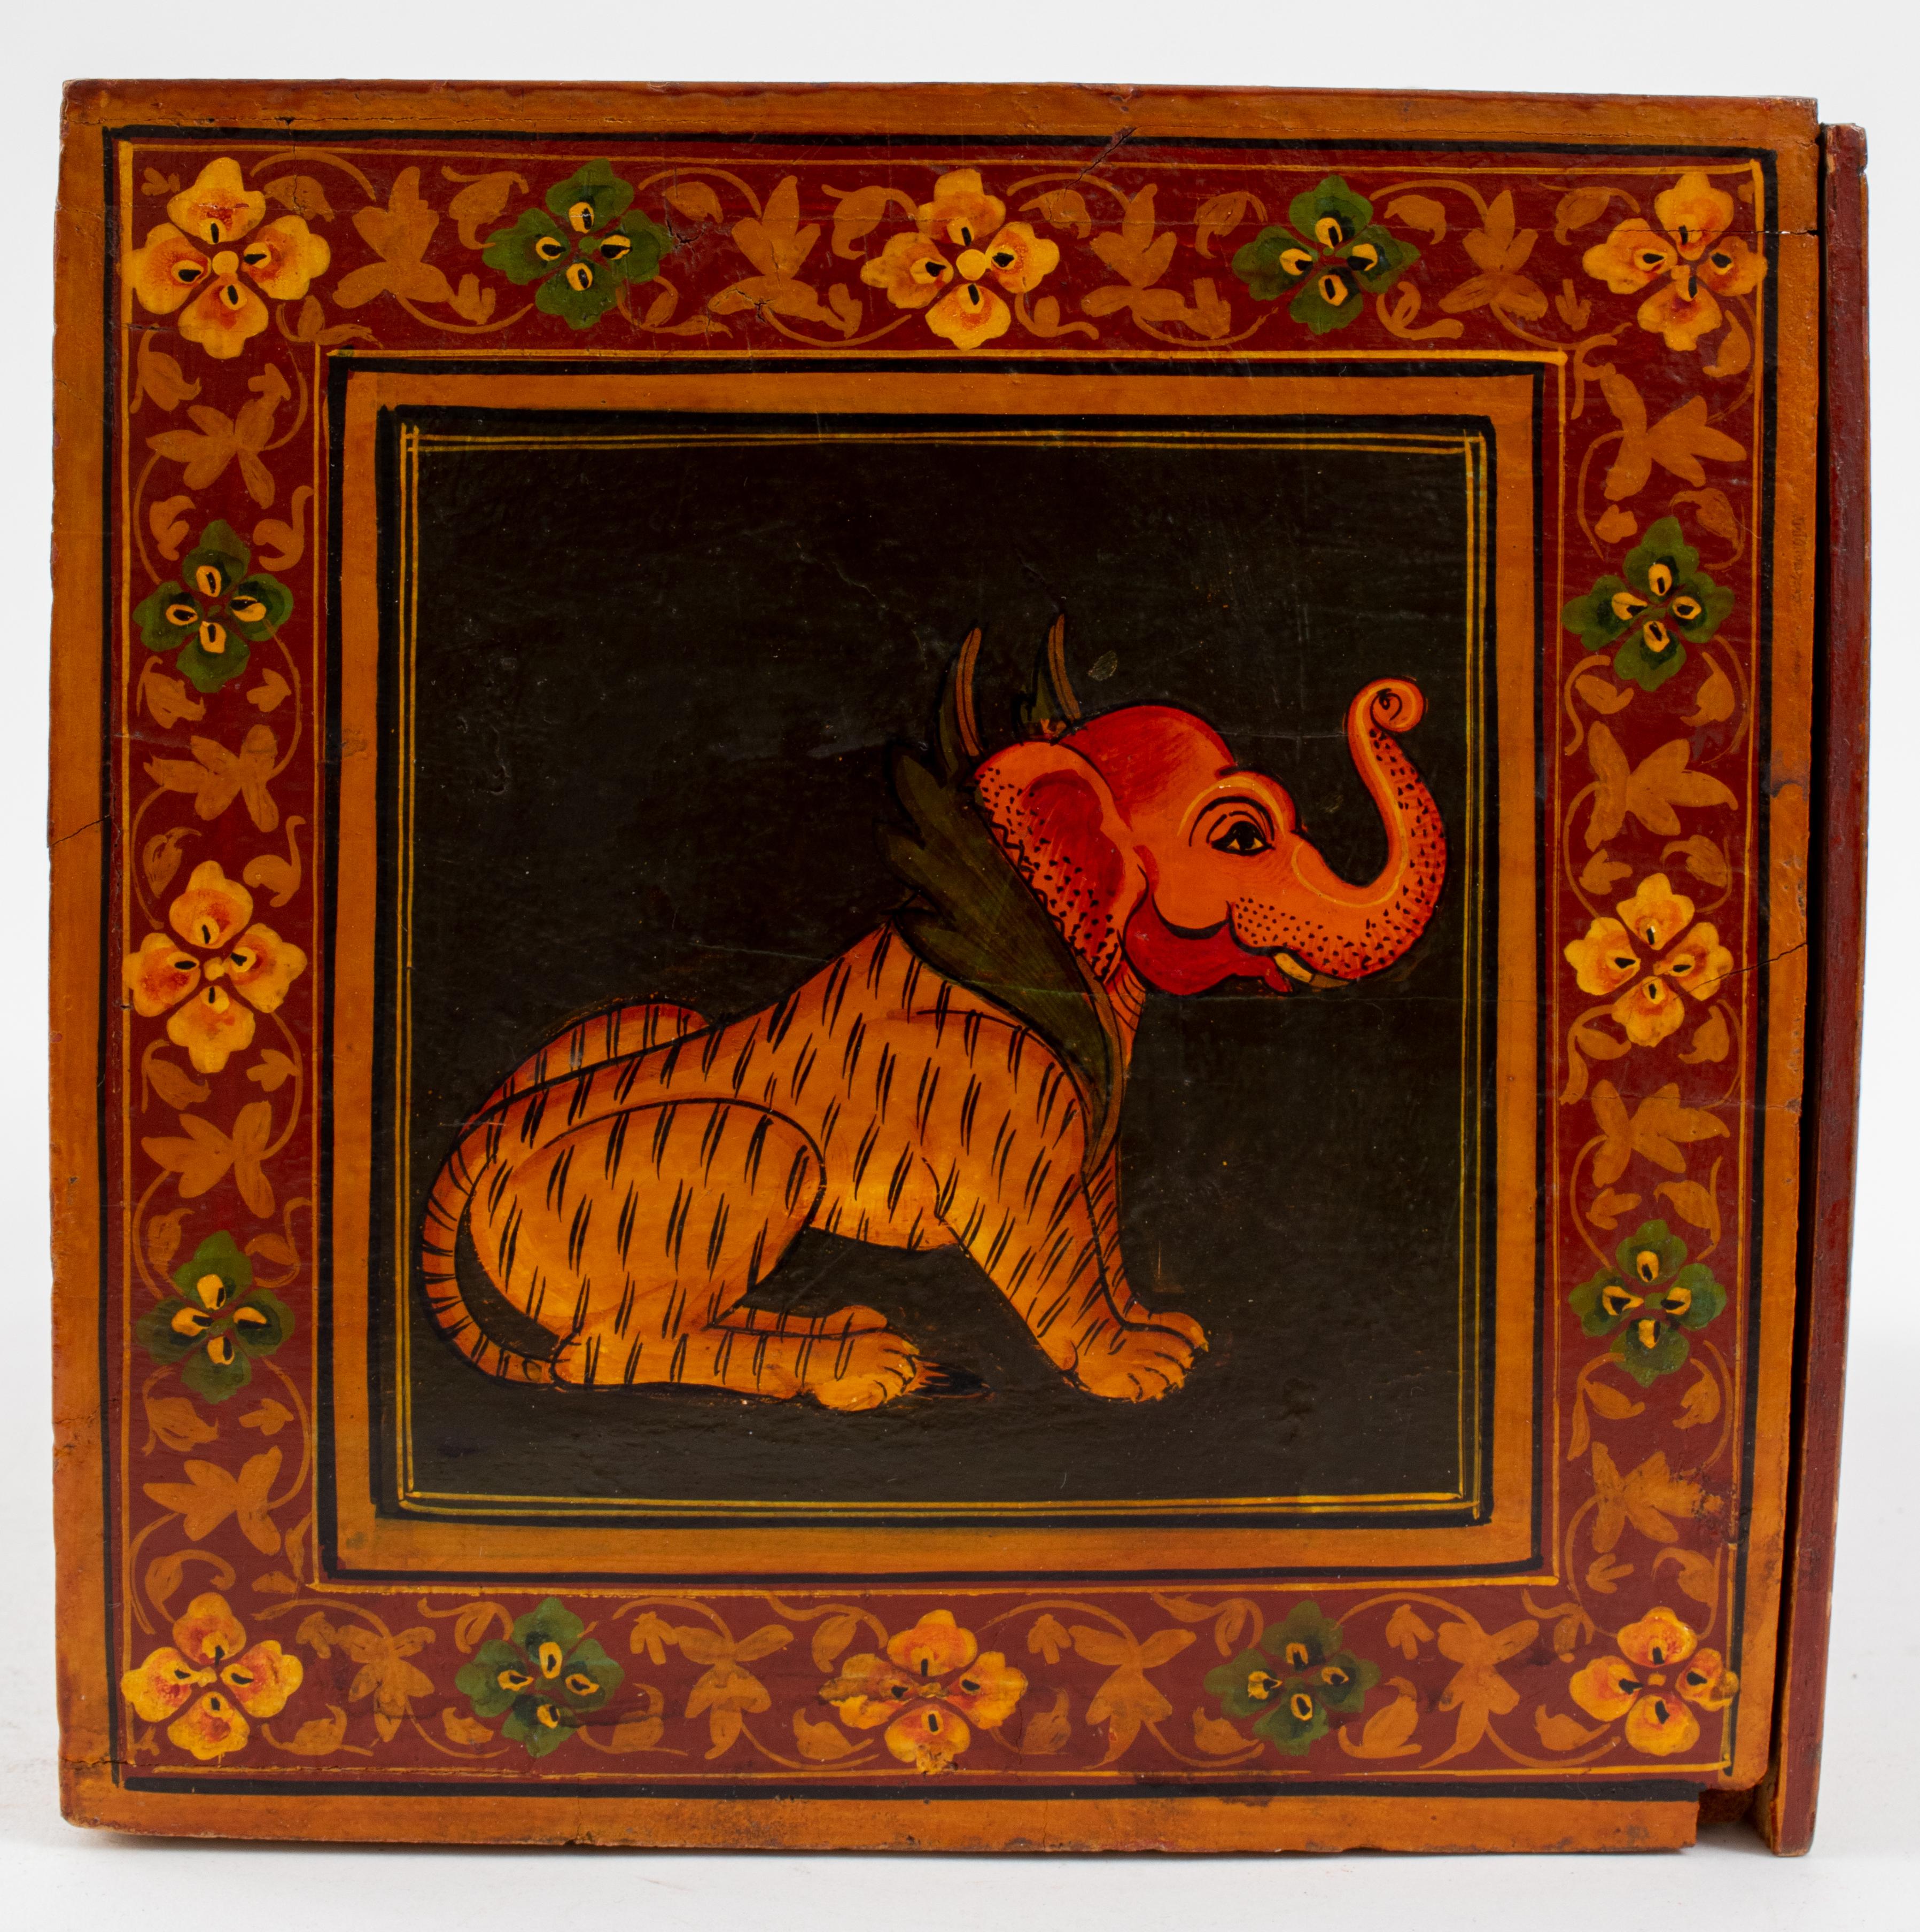 Indian wooden box with hand-painted images of chimeras, Ganesha, and a woman. The box opens to reveal one large drawer and three small ones. 
The drawers feature metal accents. 
Measures: 8